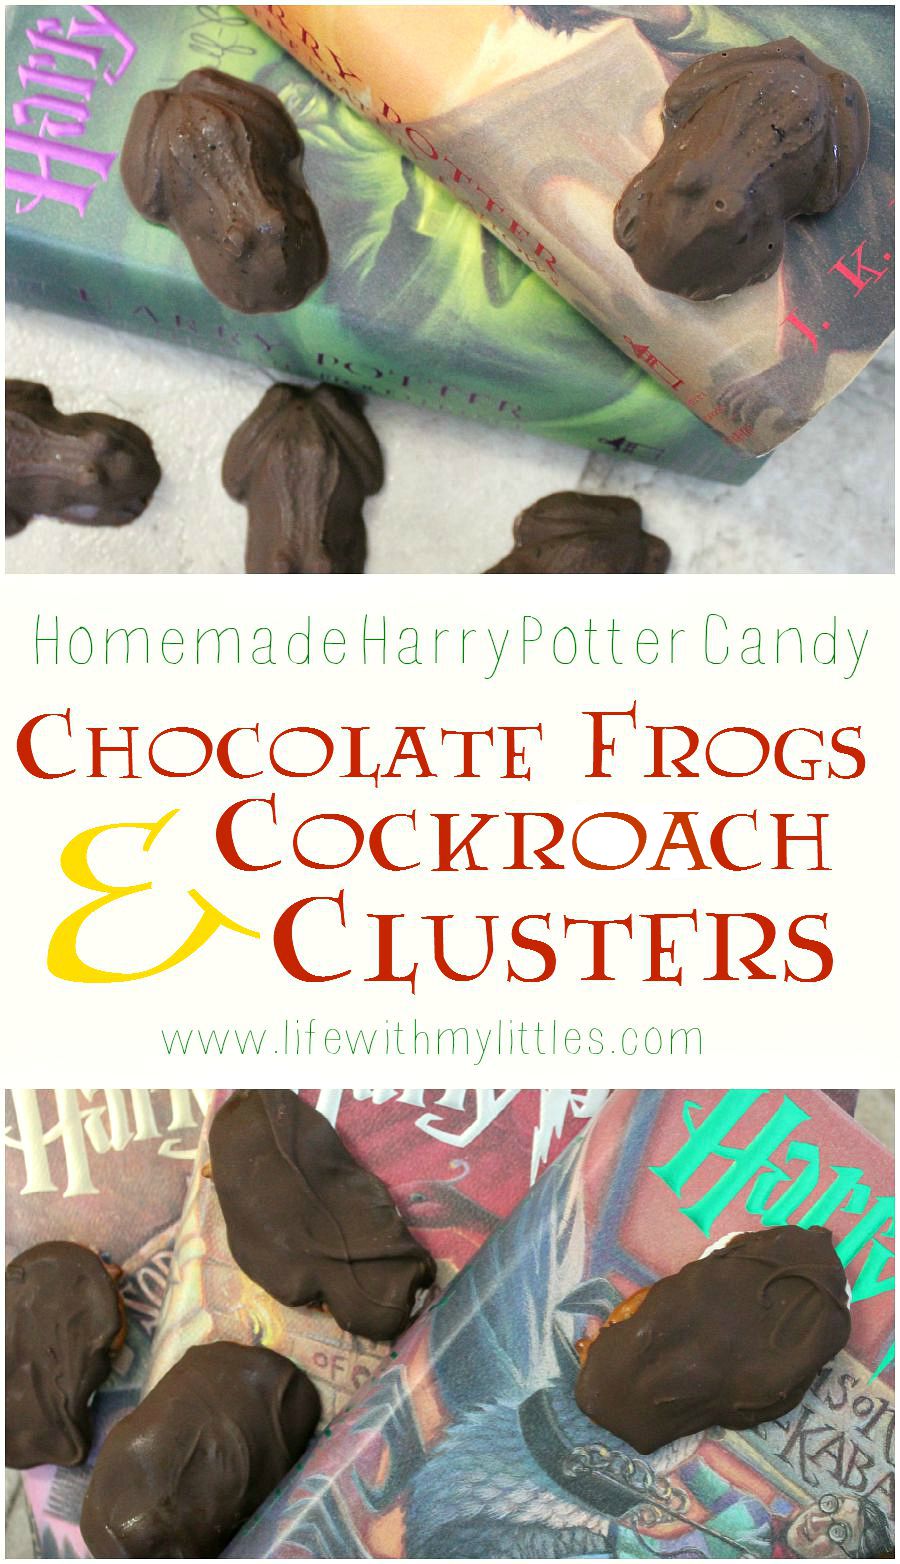 Homemade Harry Potter candy: learn how to make chocolate frogs and cockroach clusters! The perfect Harry Potter desserts!